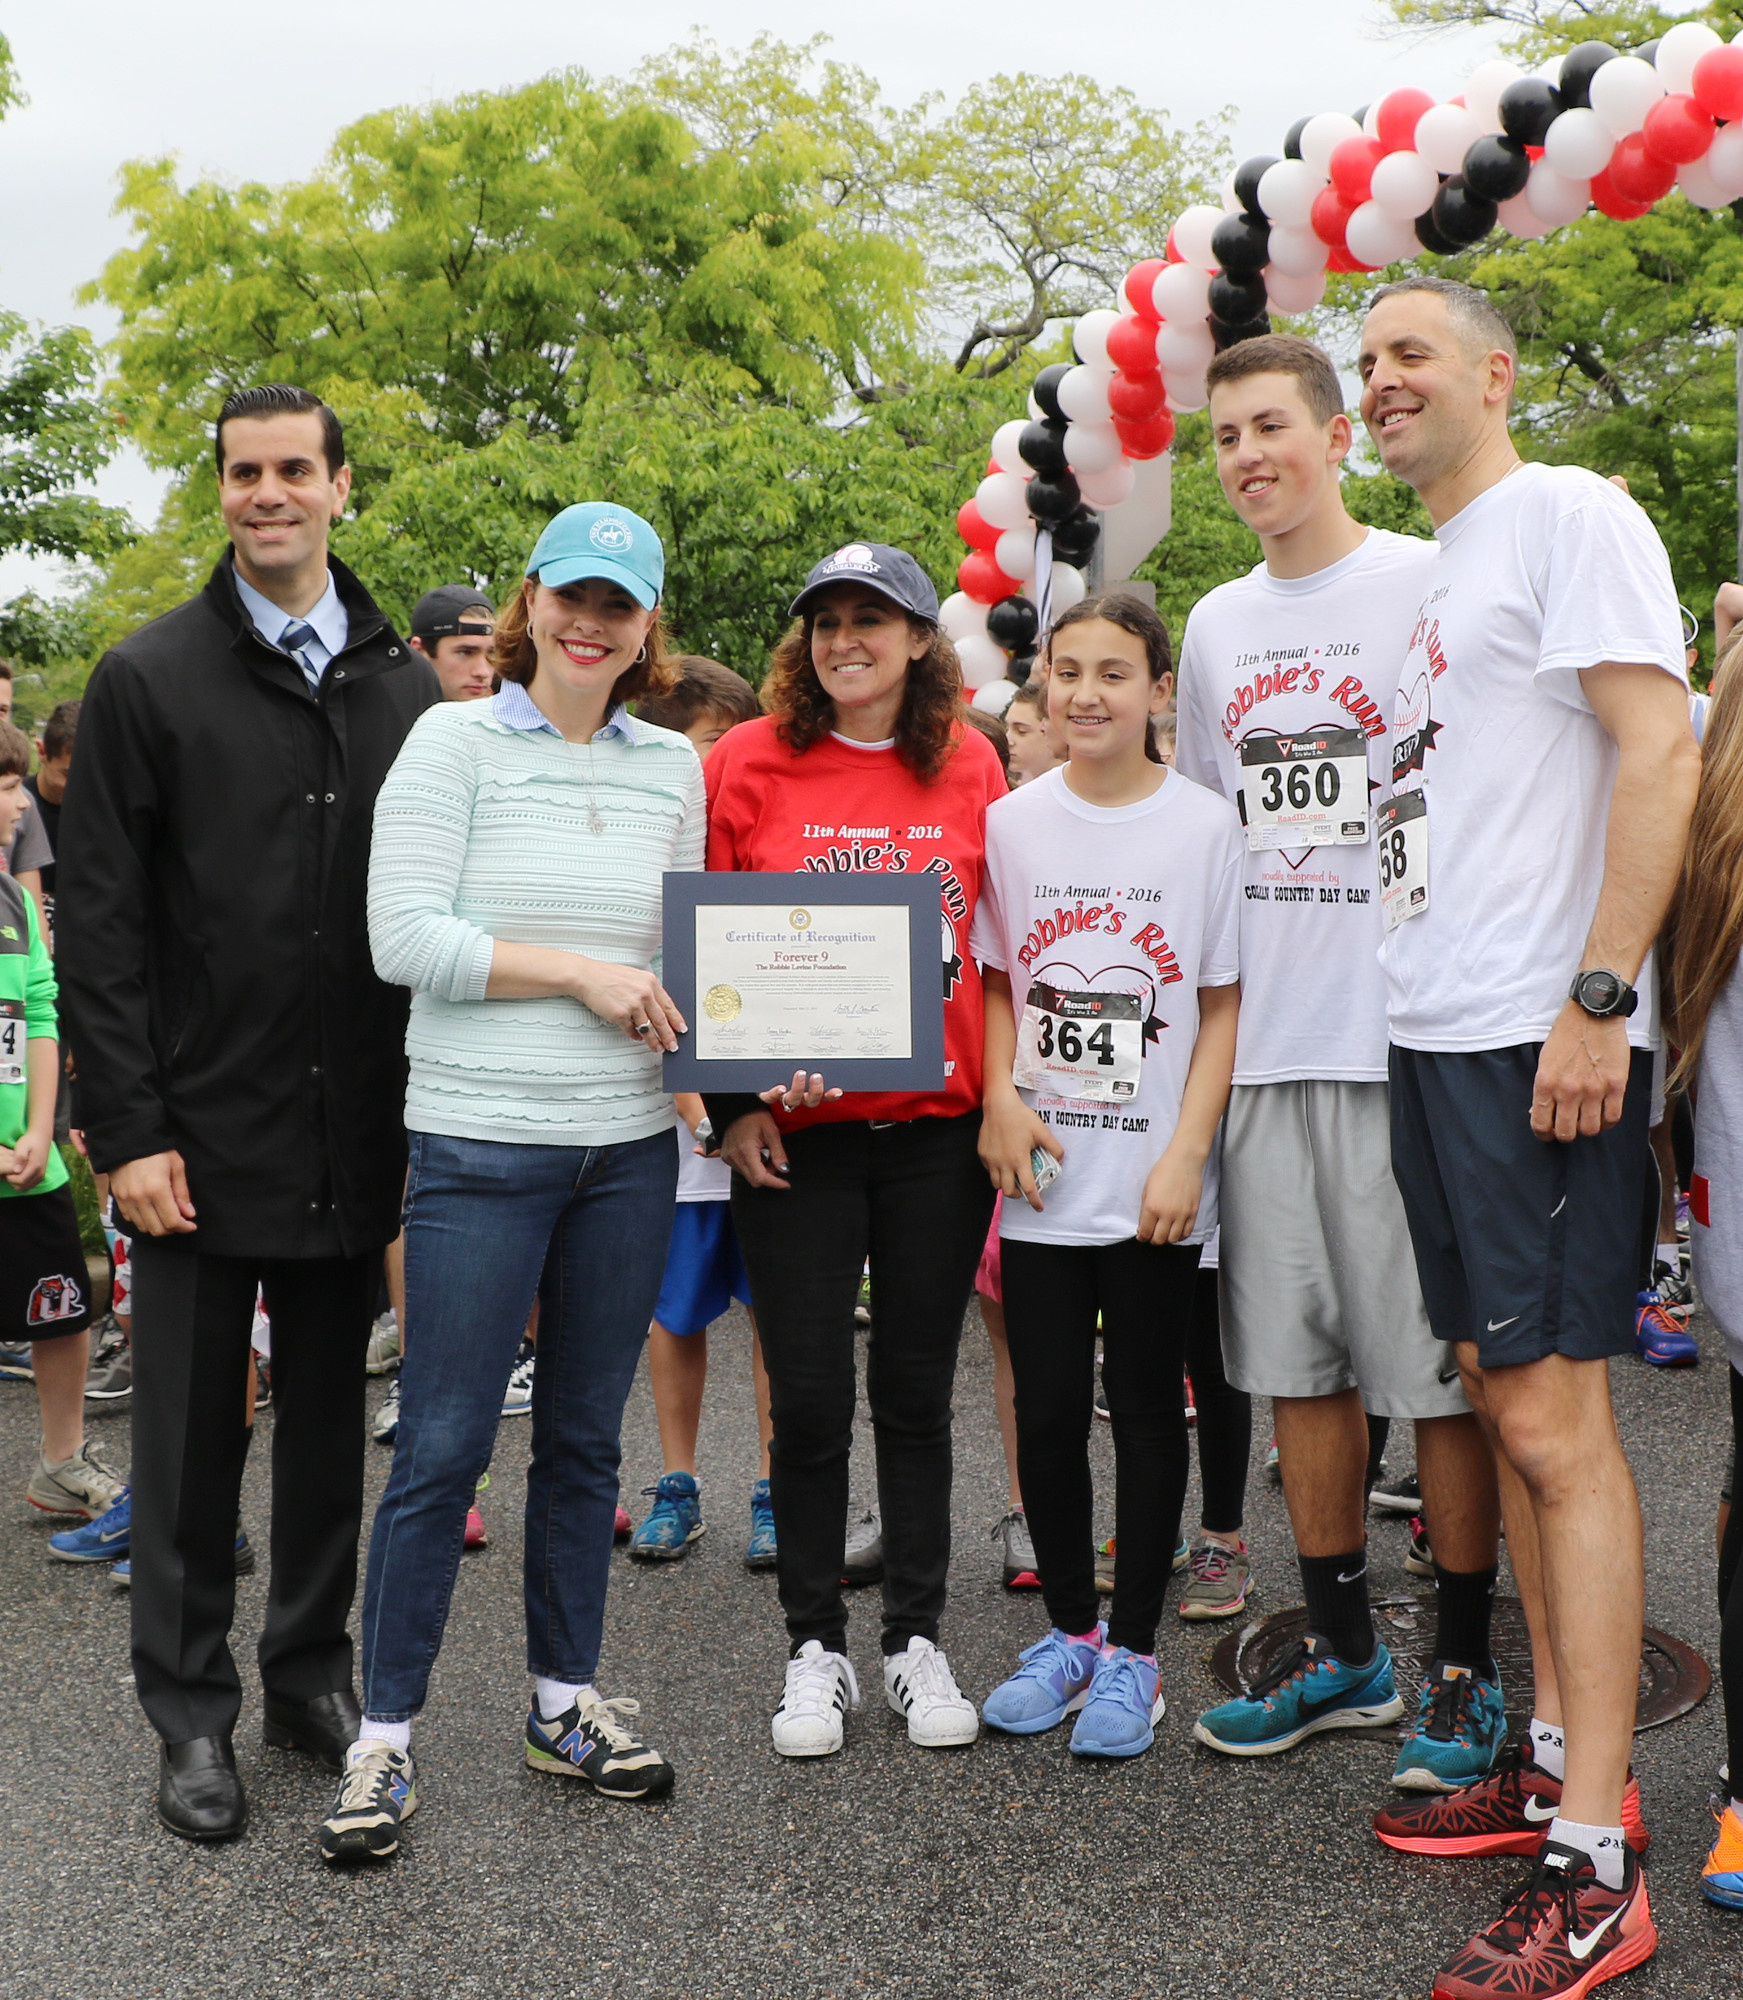 Hundreds attended the event, including, from left, State Sen. Michael Venditto, Town of Hempstead Councilwoman Erin King Sweeney, and the Levine family ––Jill, Rylie, 9, Josh, 17, and Craig.